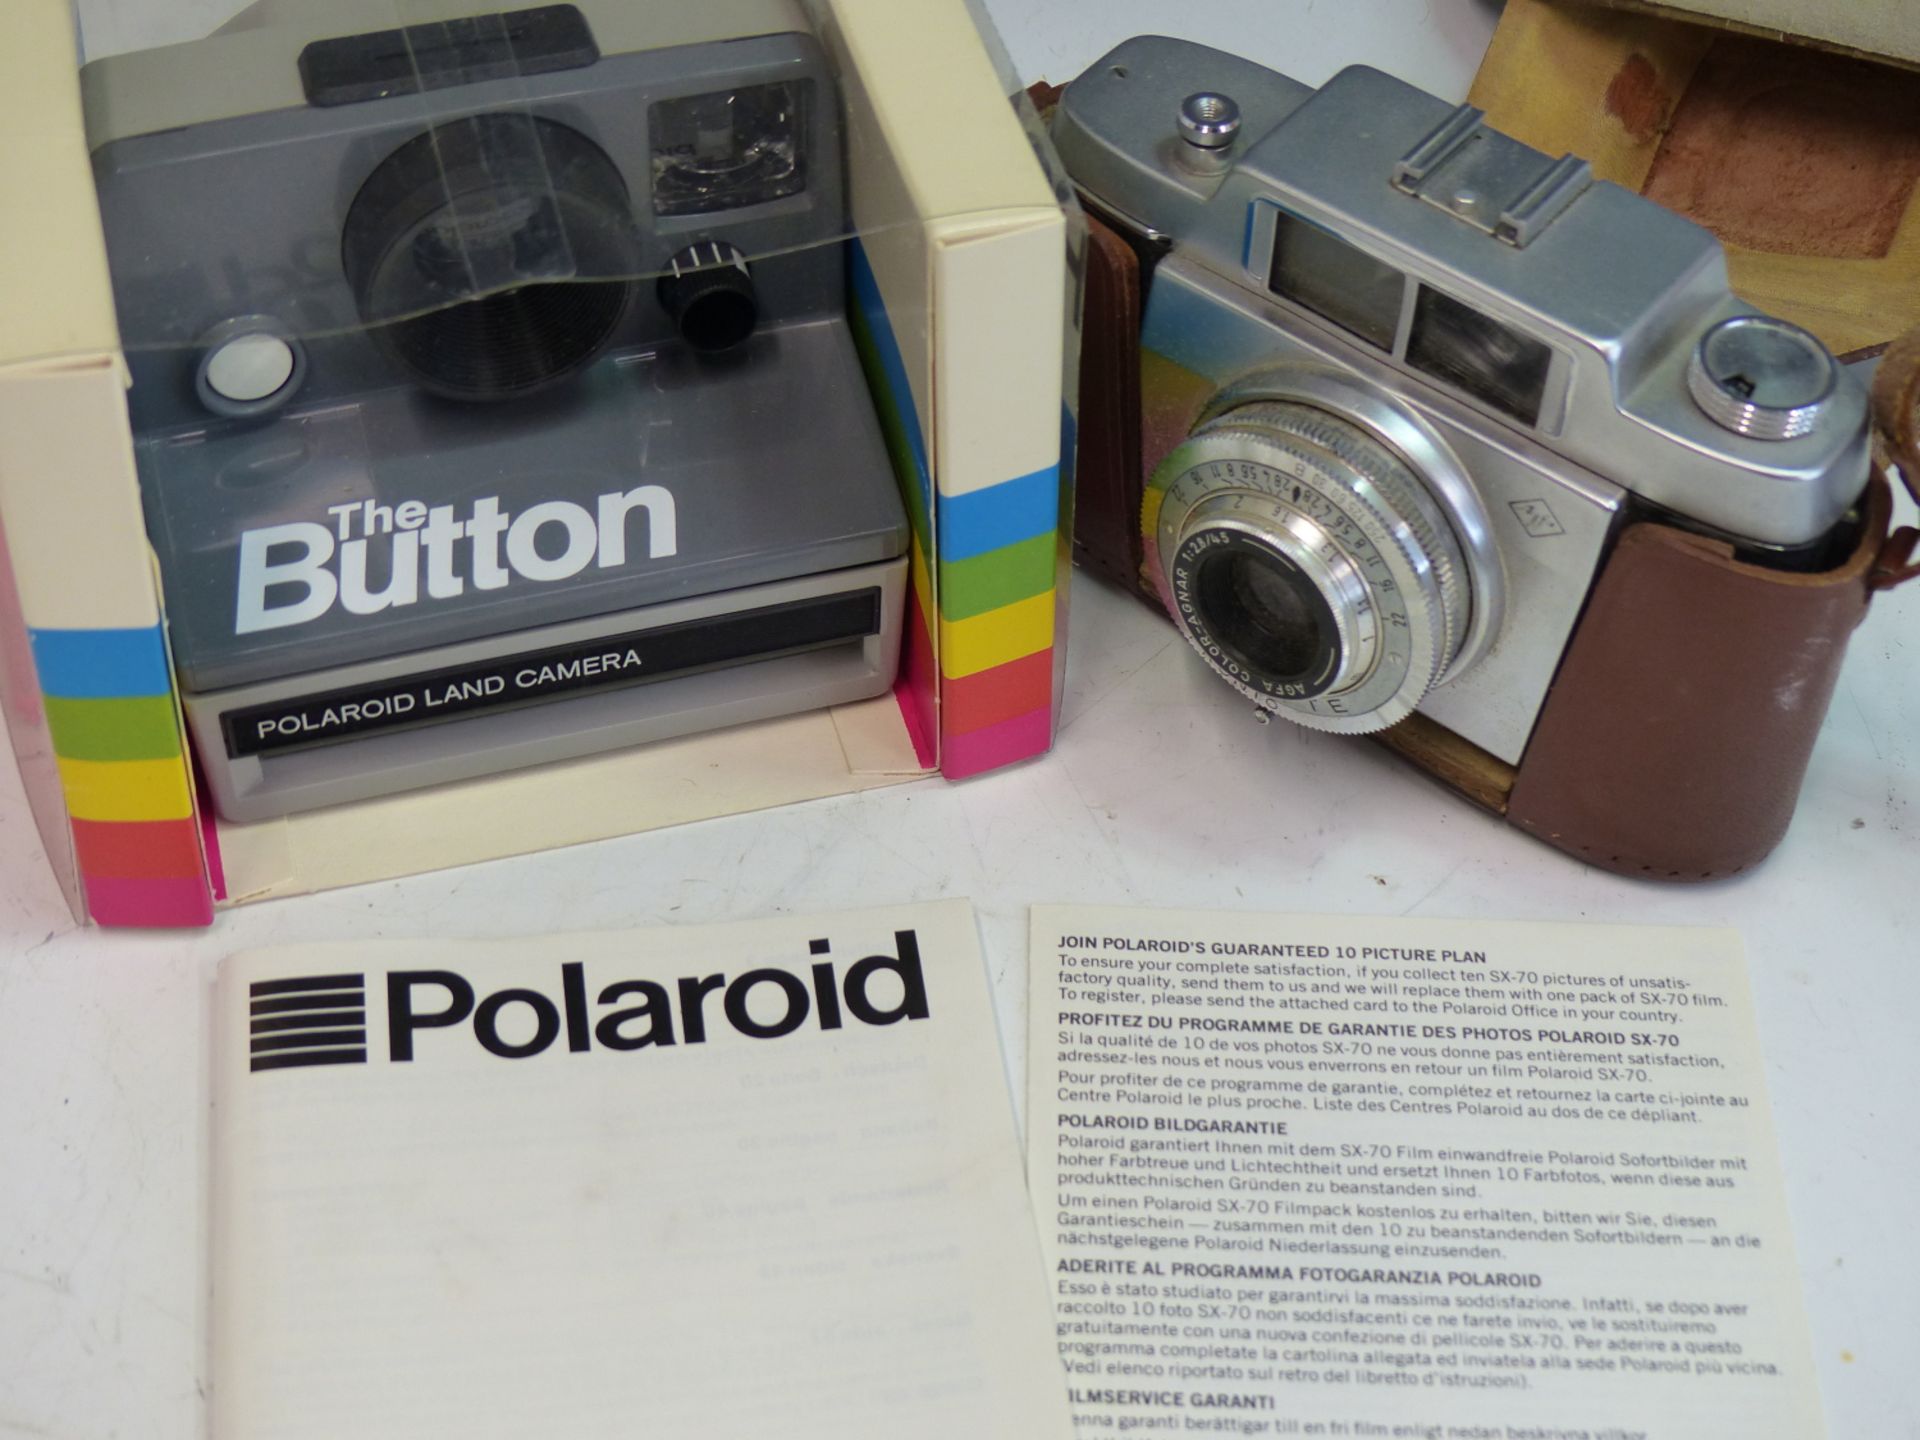 A POLAROID LAND CAMERA "THE BUTTON" IN ORIGINAL PACKAGING WITH MANUAL. TOGETHER WITH AN AGFA SILETTE - Bild 3 aus 3